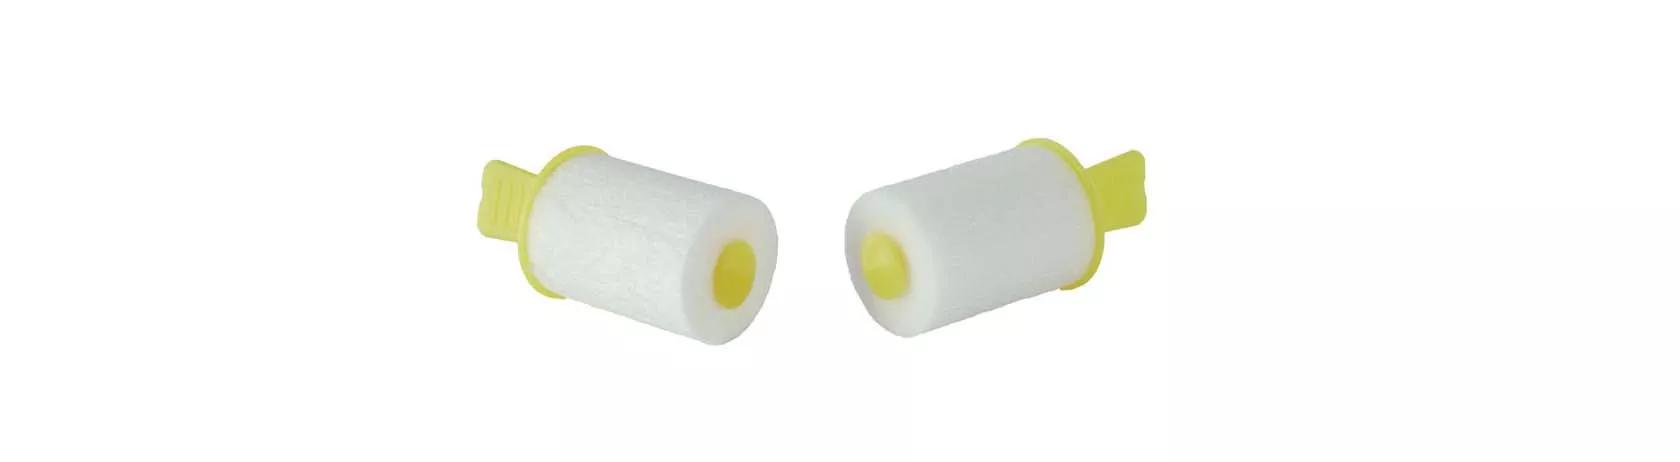 white and yellow fluid absorption plugs 